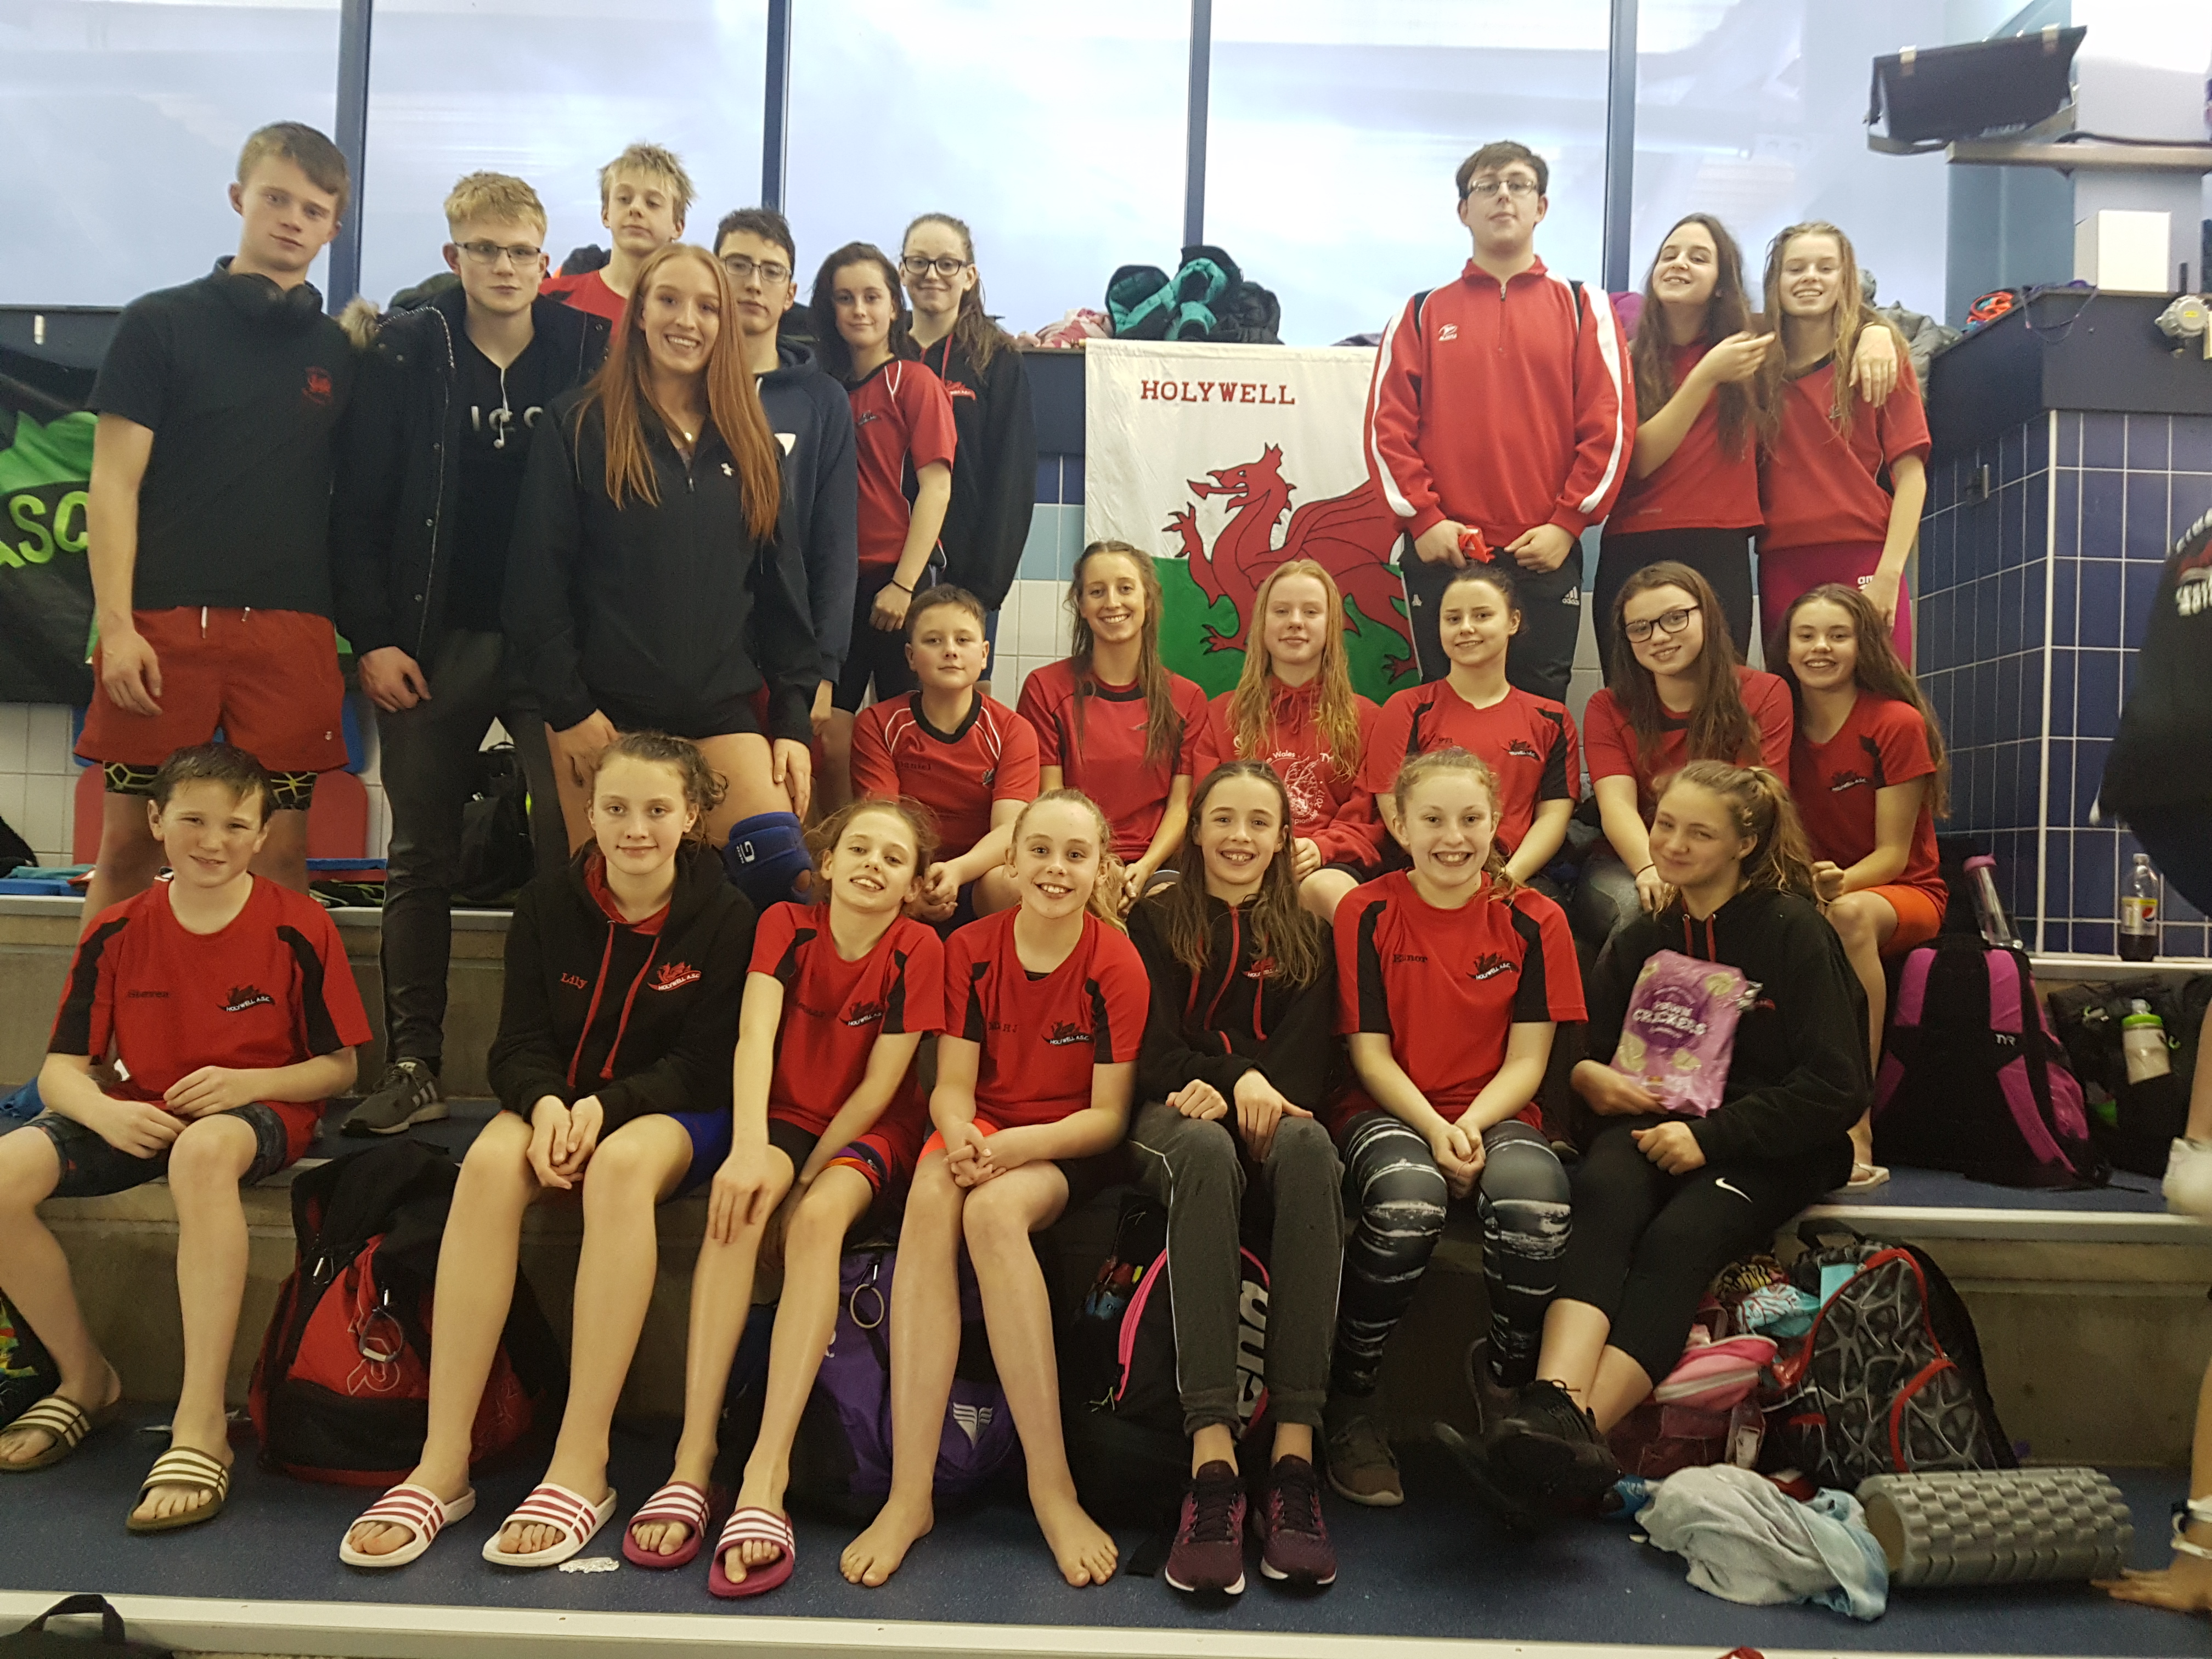 North Wales 2019 Regional Championships Review - Holywell Swimming Club